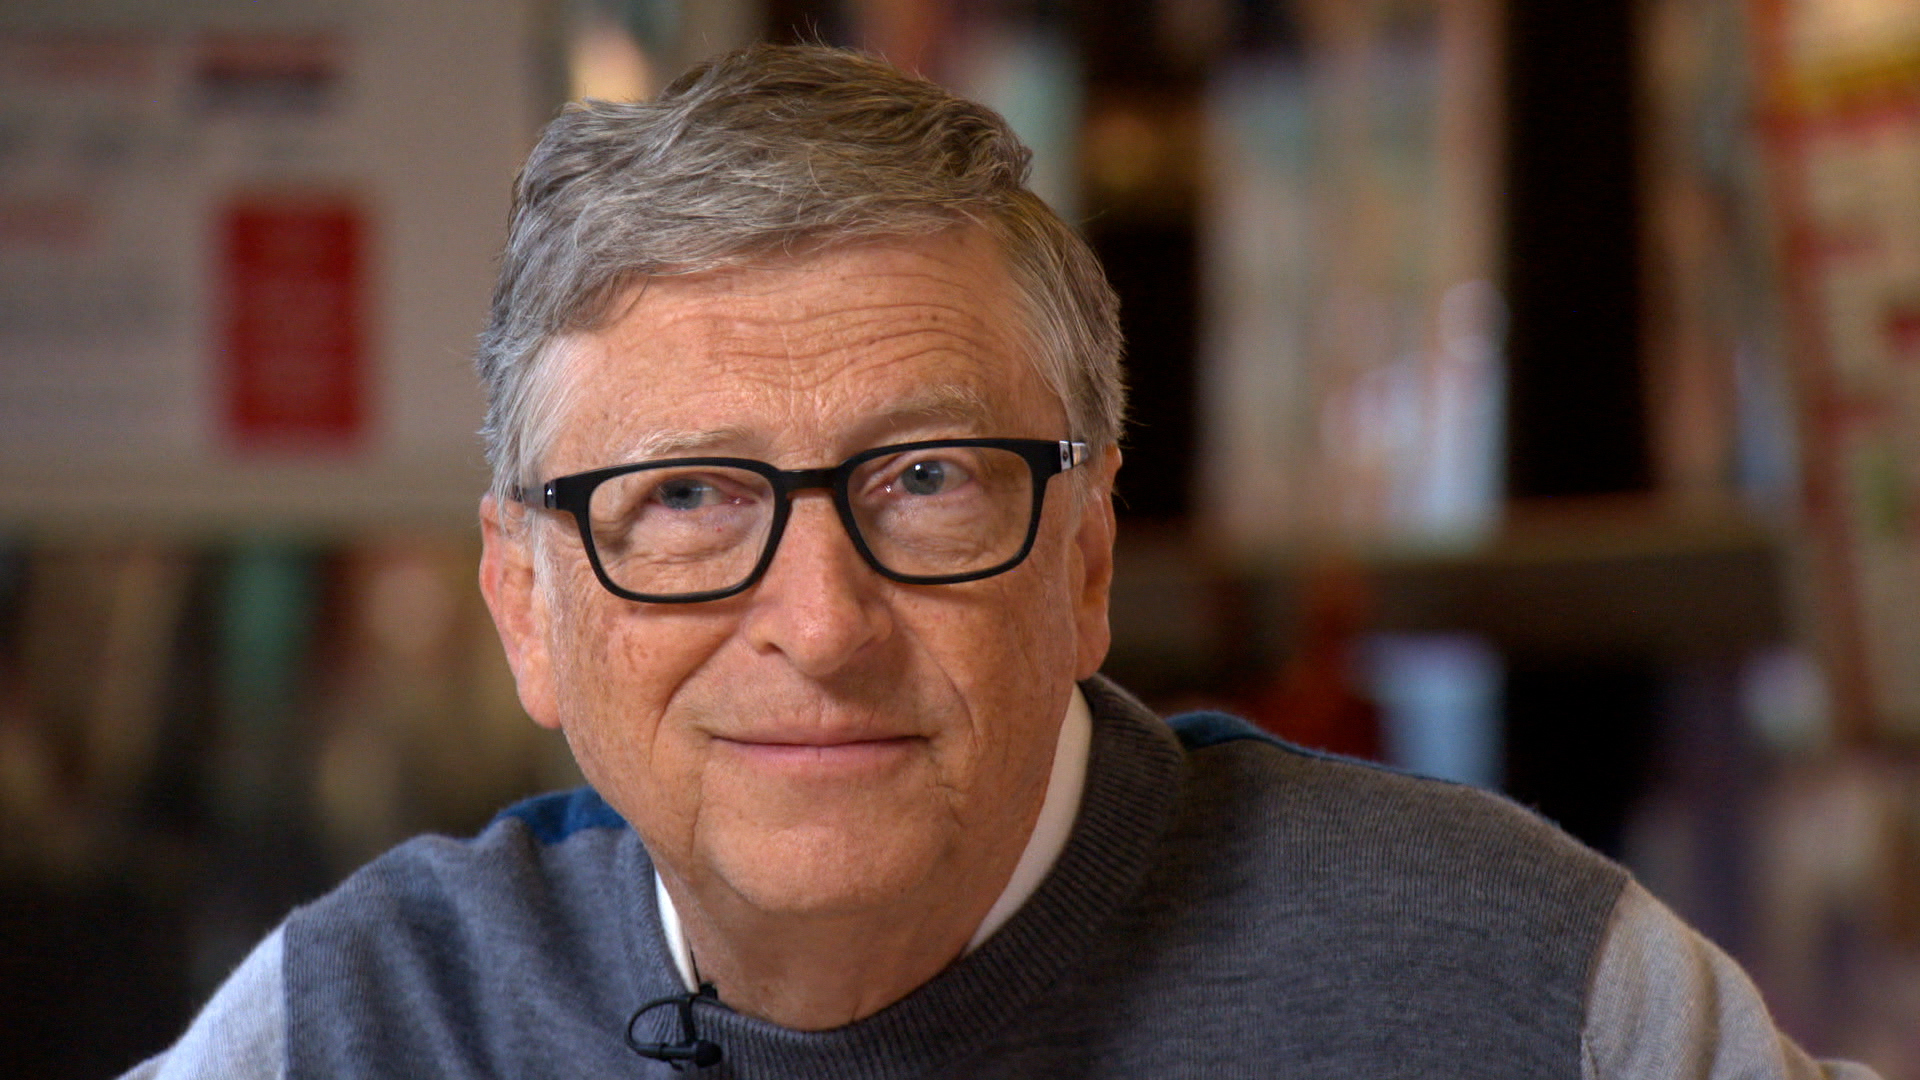 Watch 60 Minutes Bill Gates The 2021 60 Minutes interview Full show